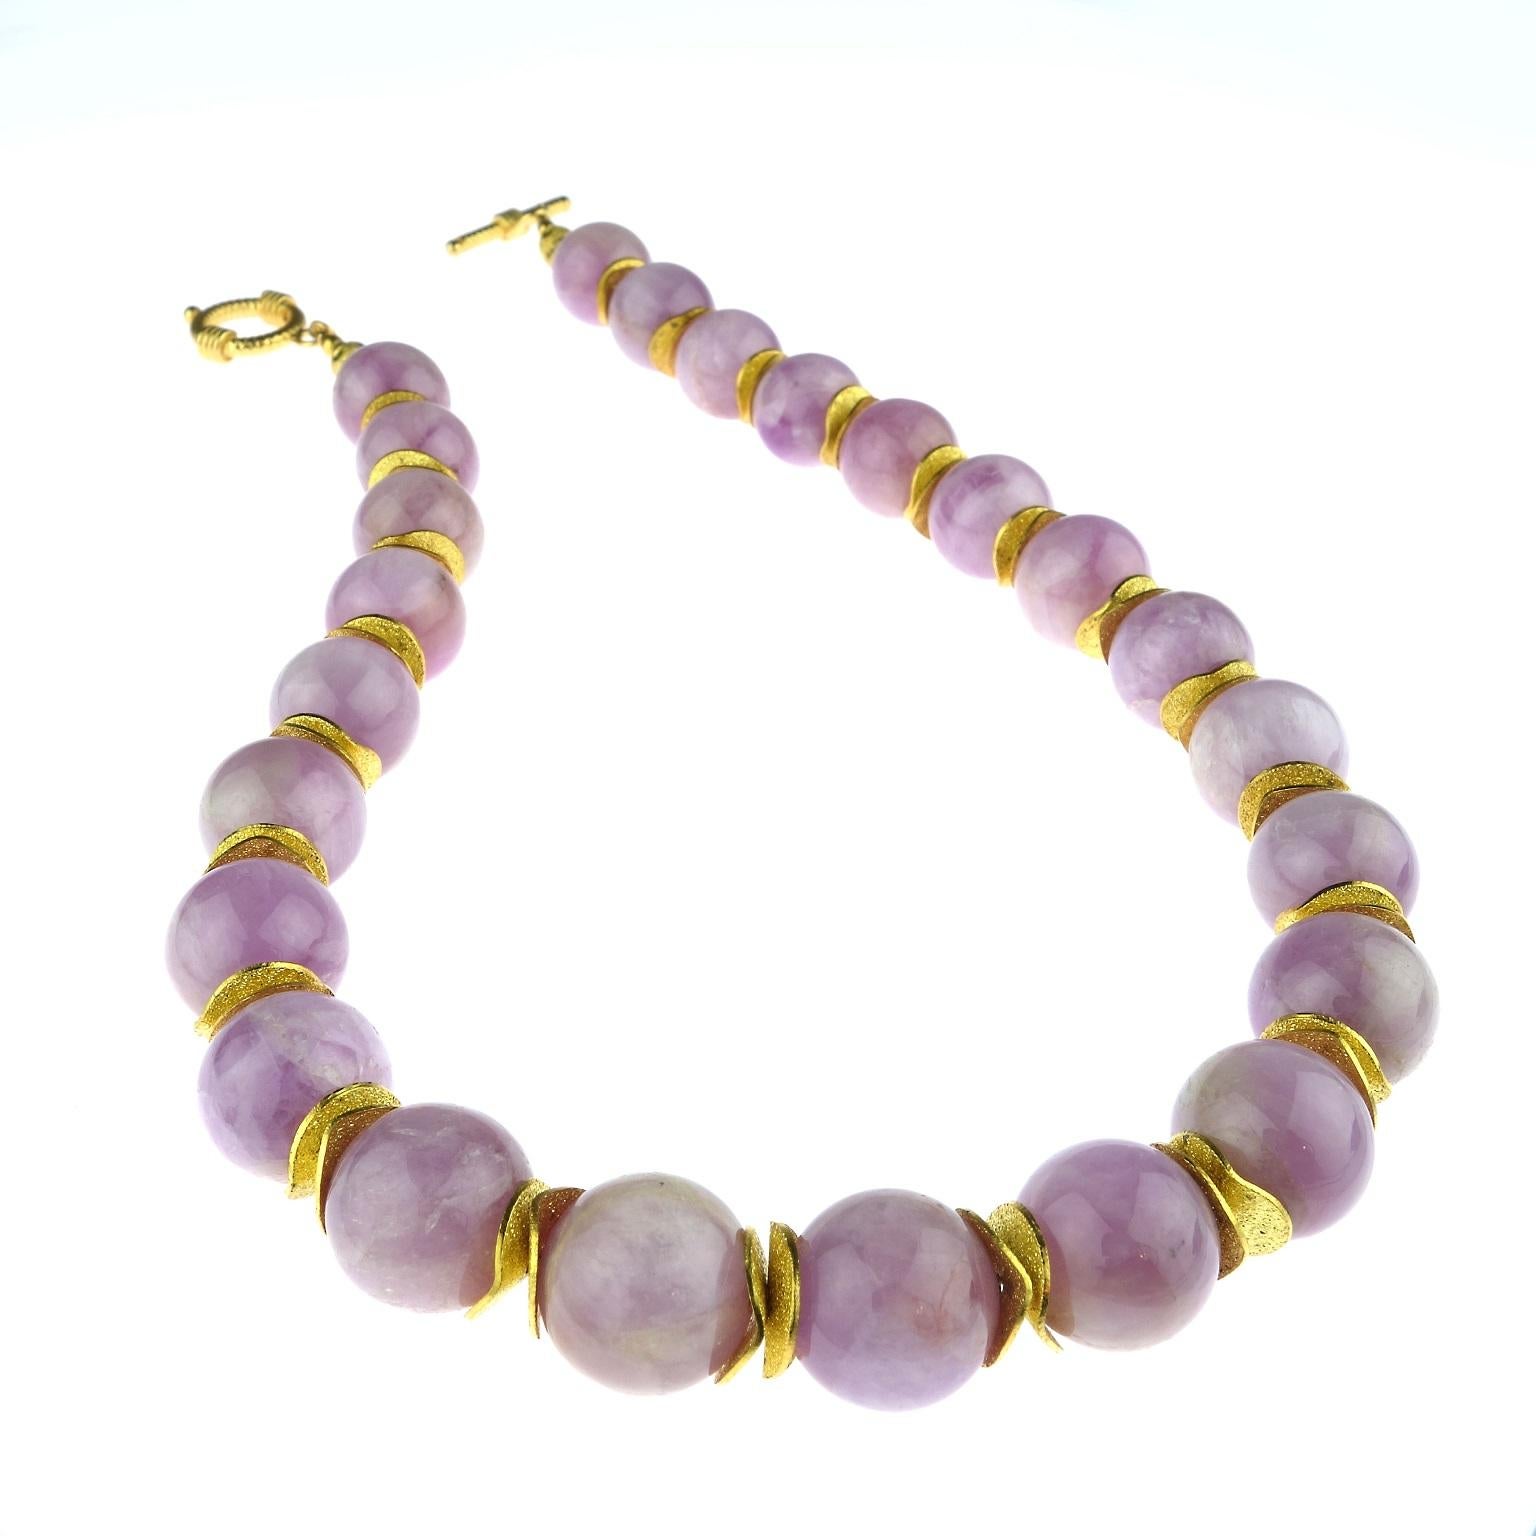 Artisan AJD Pink Kunzite with Goldy Accents 16 Inch Necklace For Sale